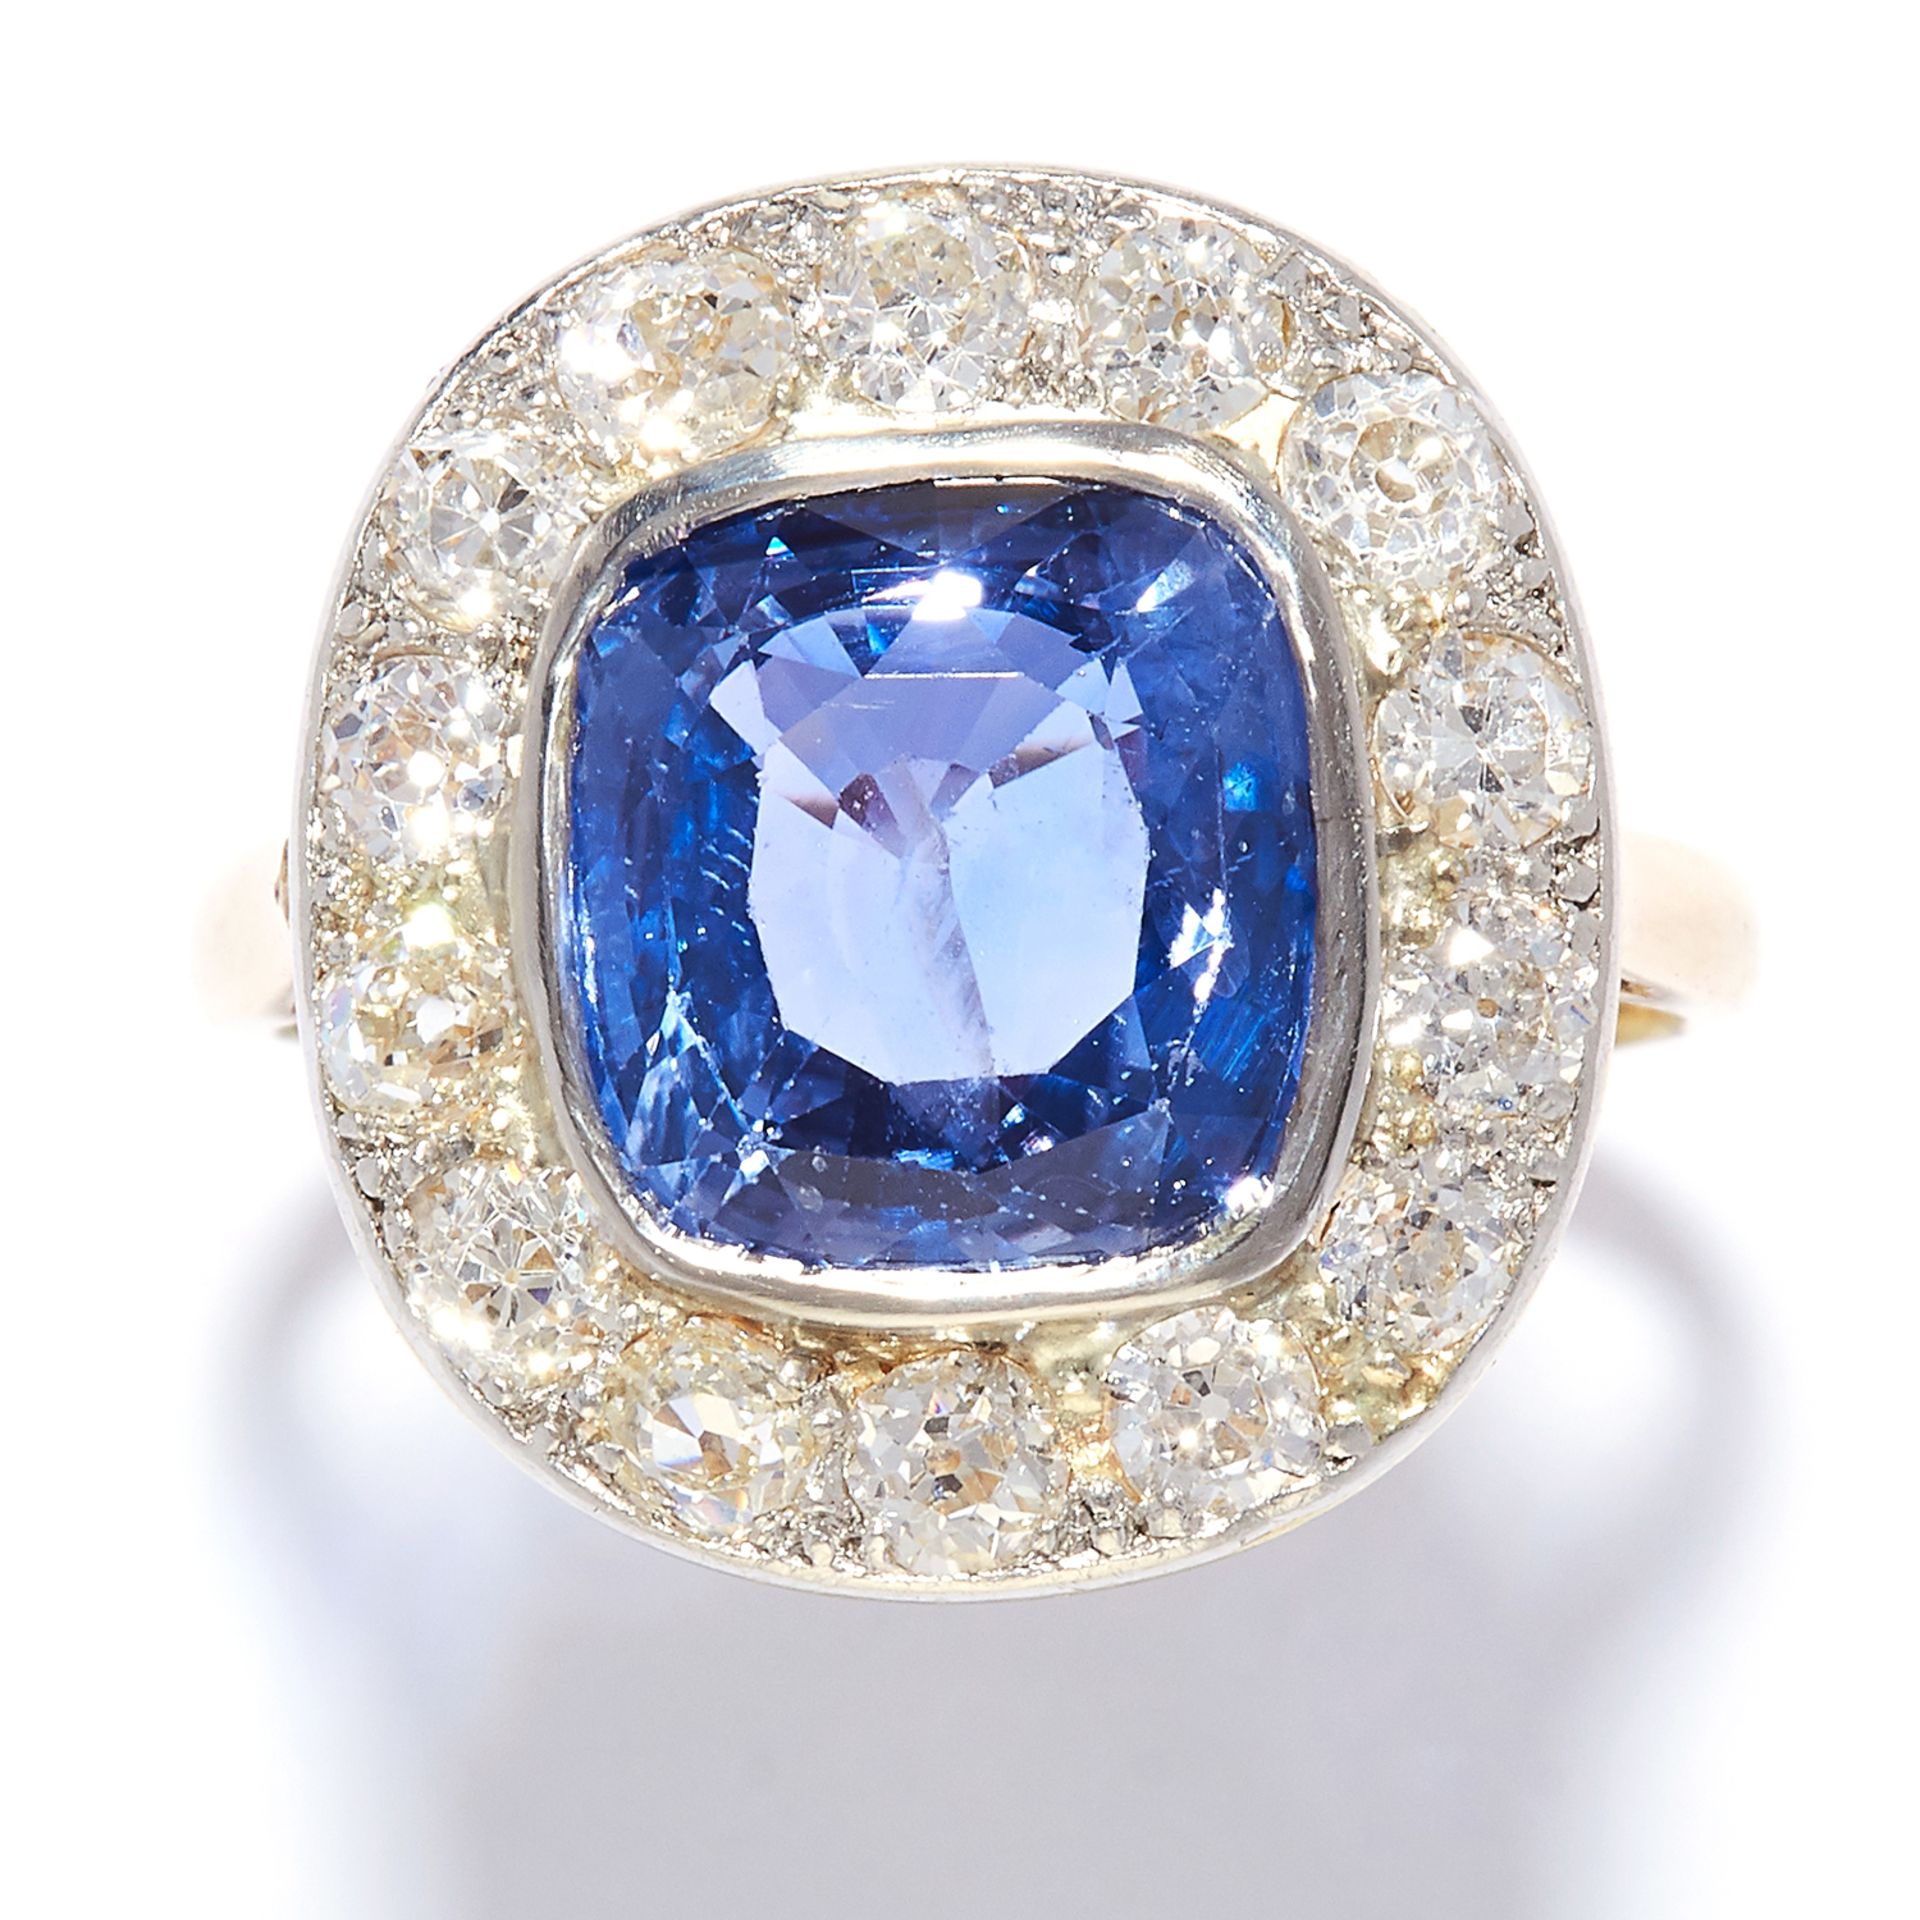 4.65 CARAT NO HEAT SAPPHIRE AND DIAMOND CLUSTER RING in yellow gold, set with a 4.65 carat cushion